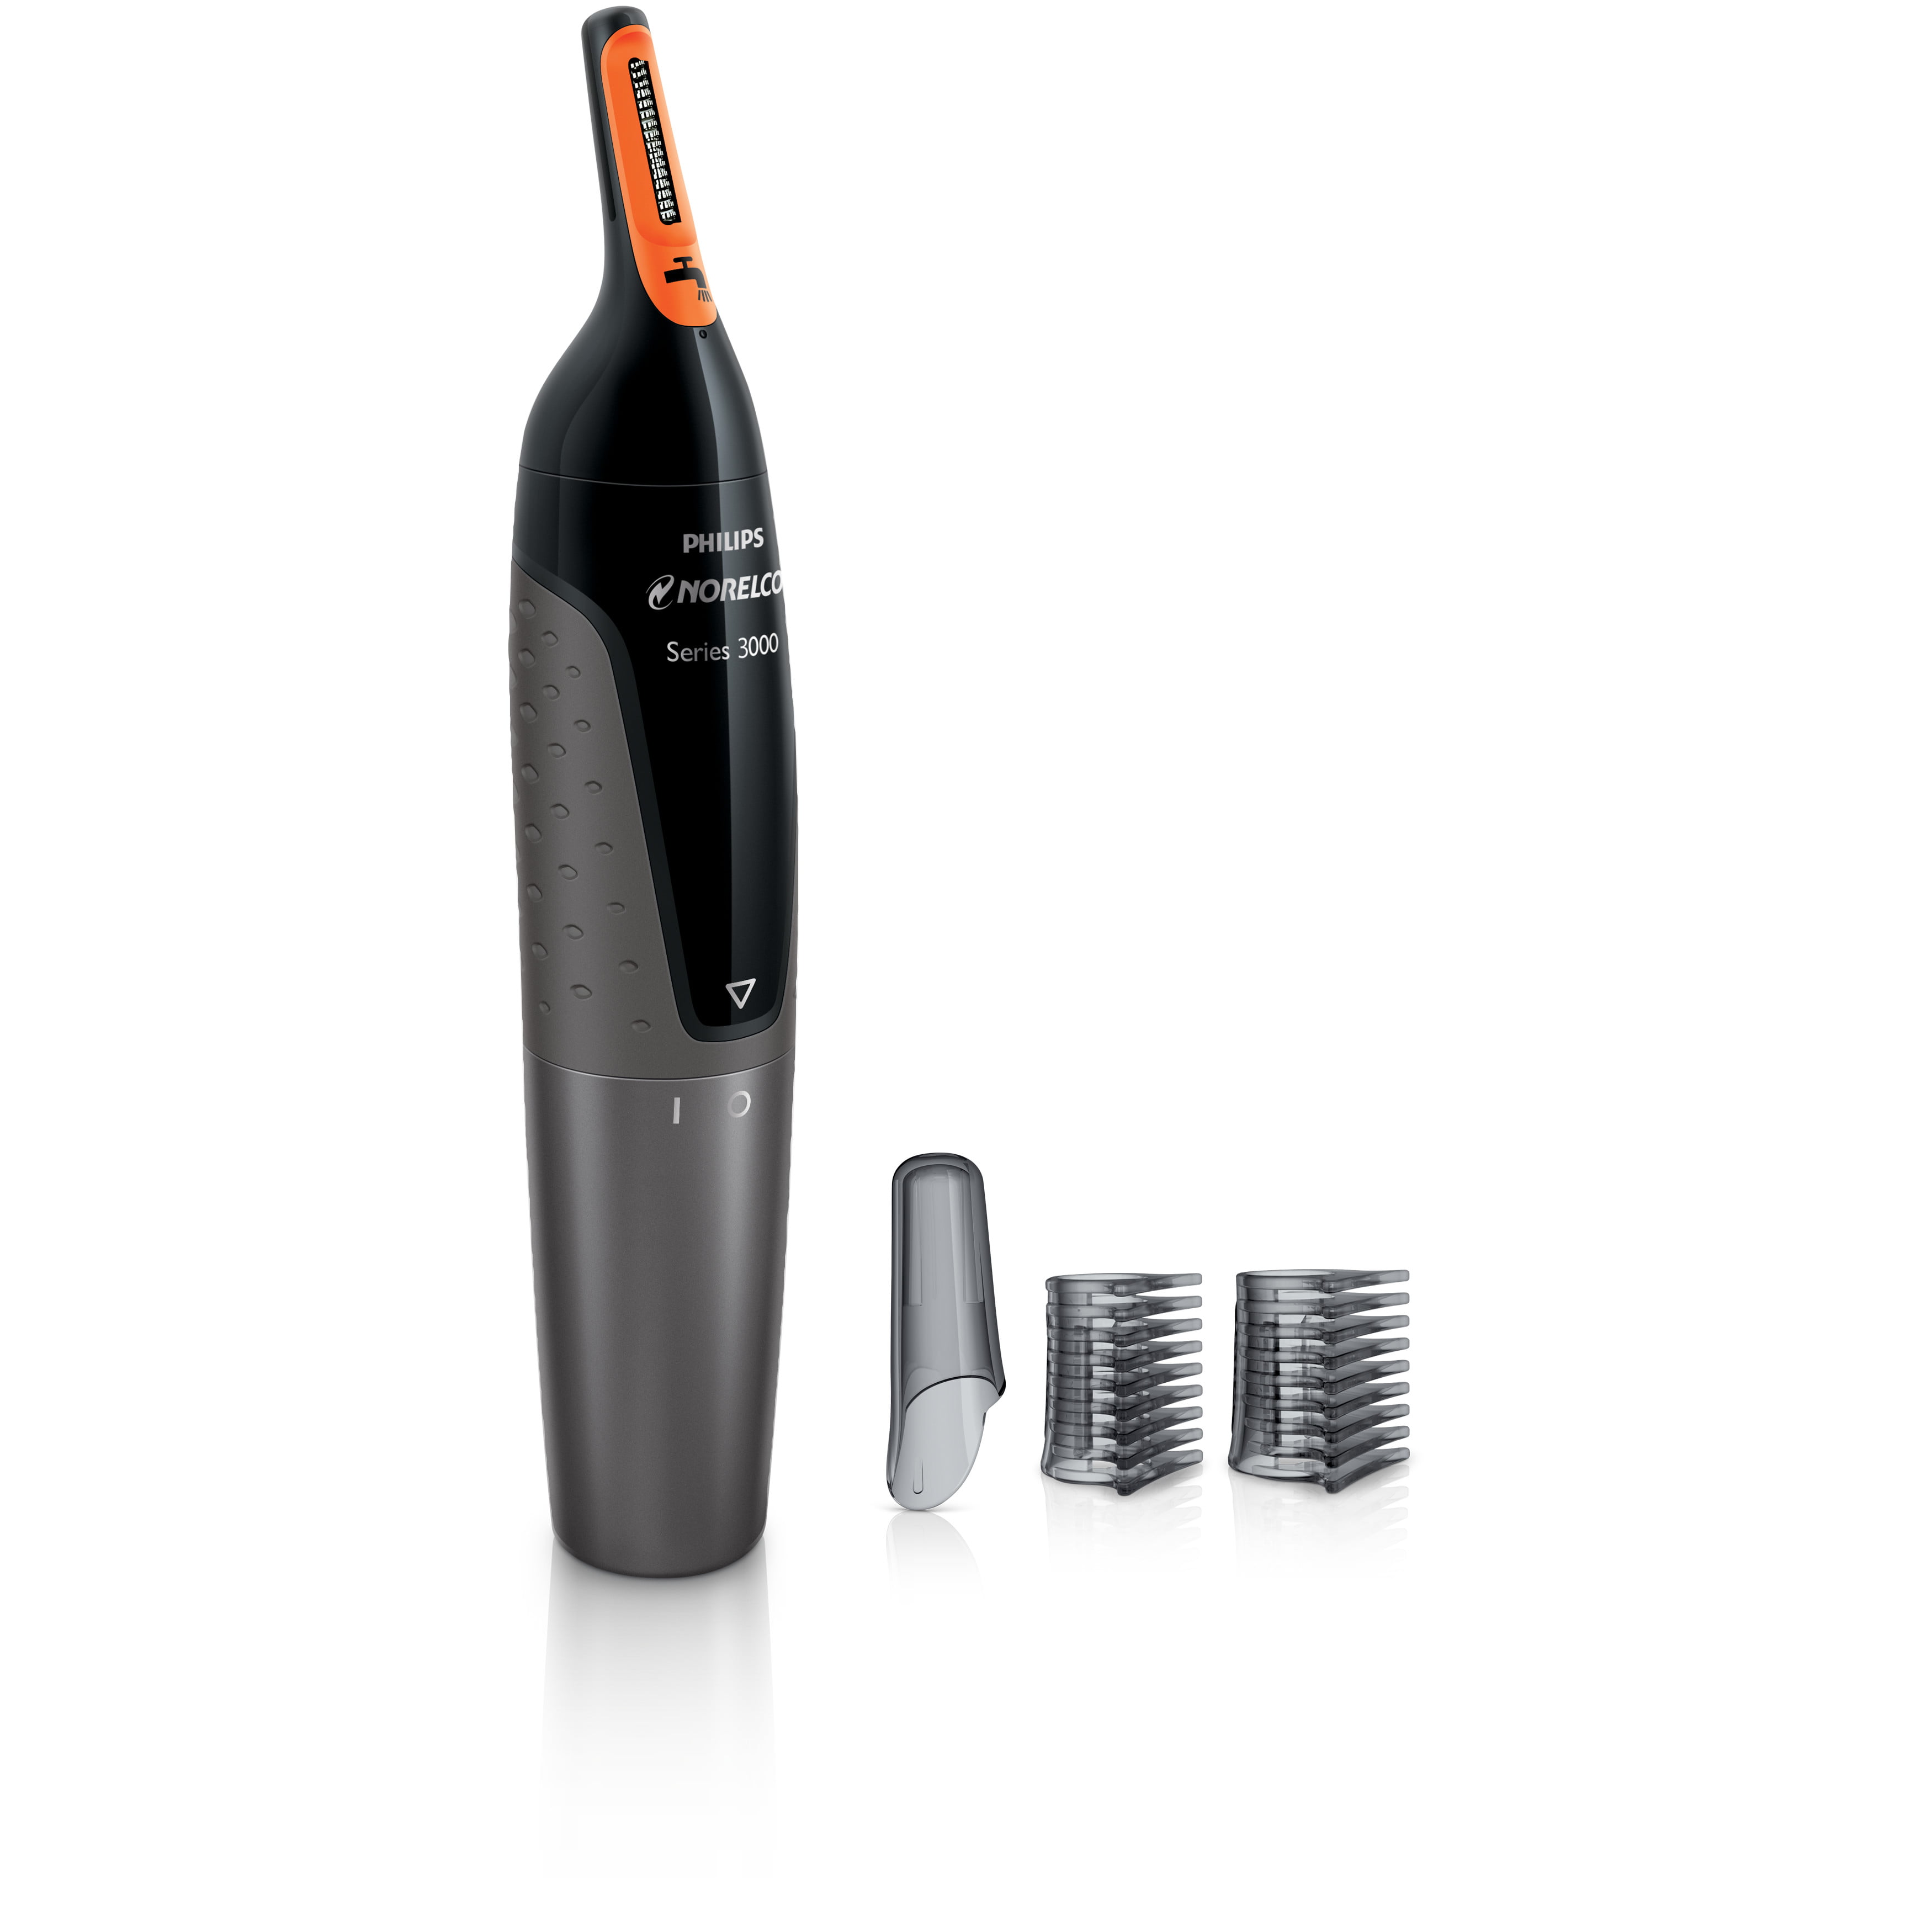 philips norelco nose trimmer series 3300